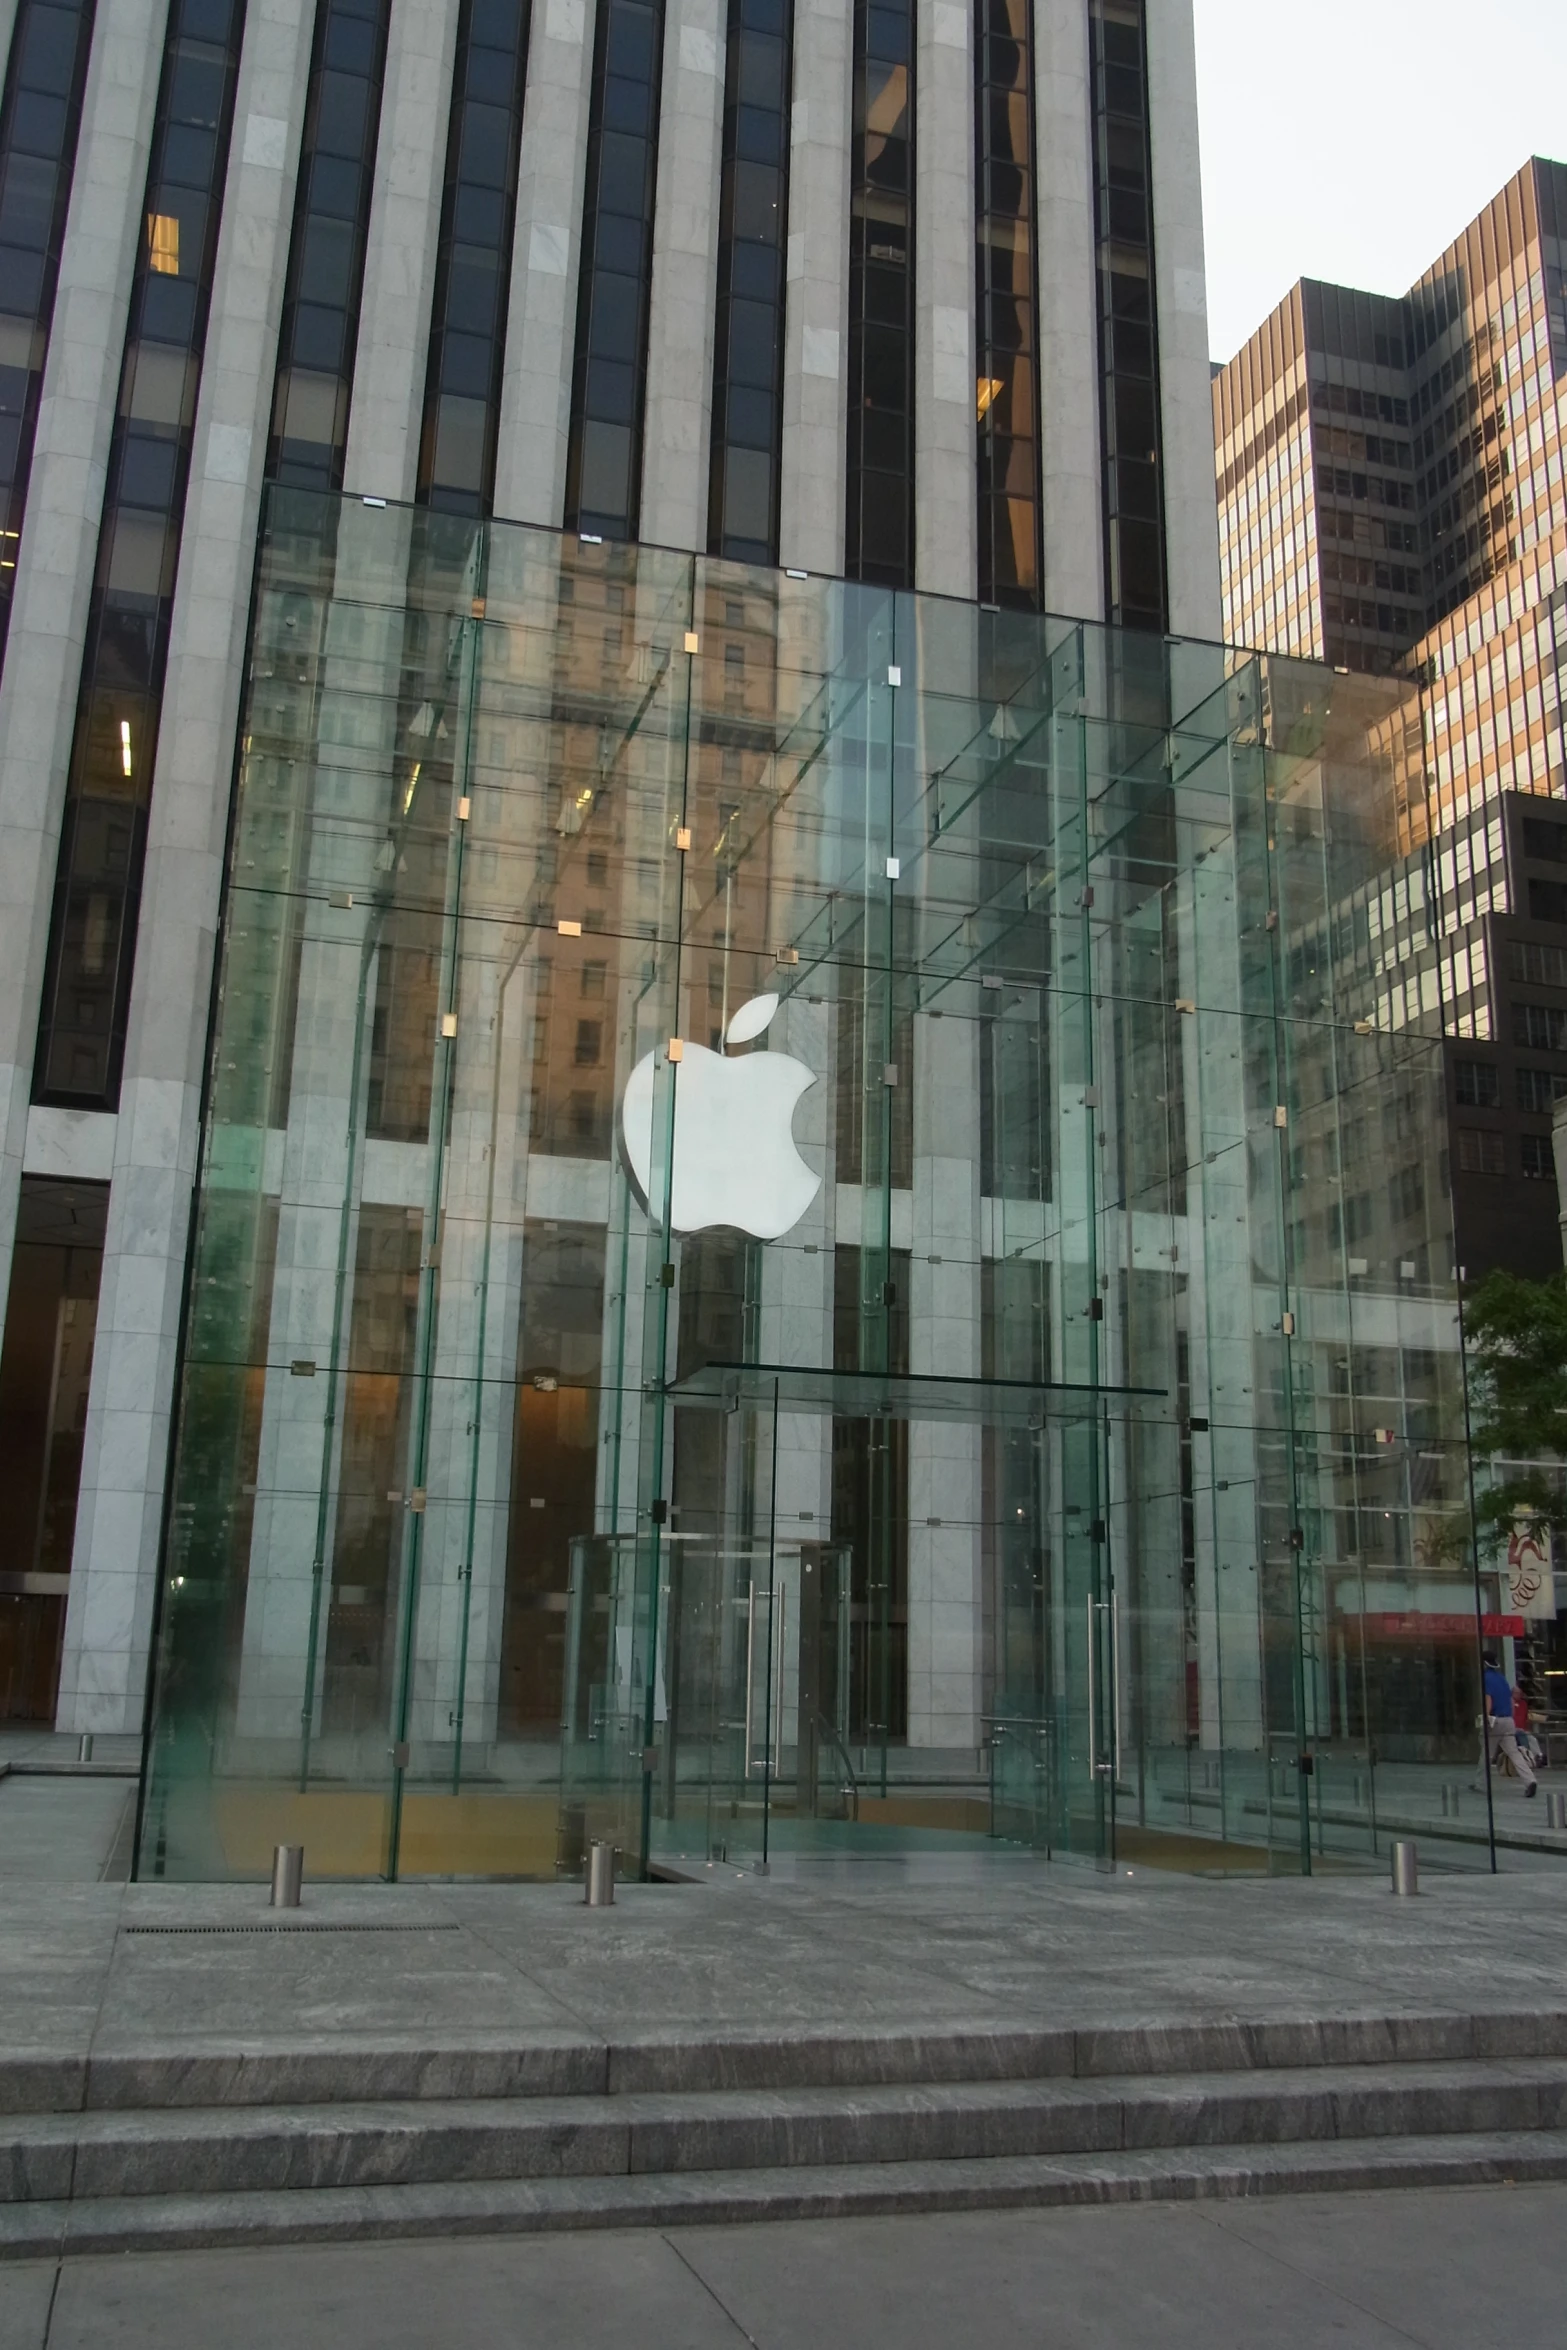 an apple store is displayed inside of the glass structure